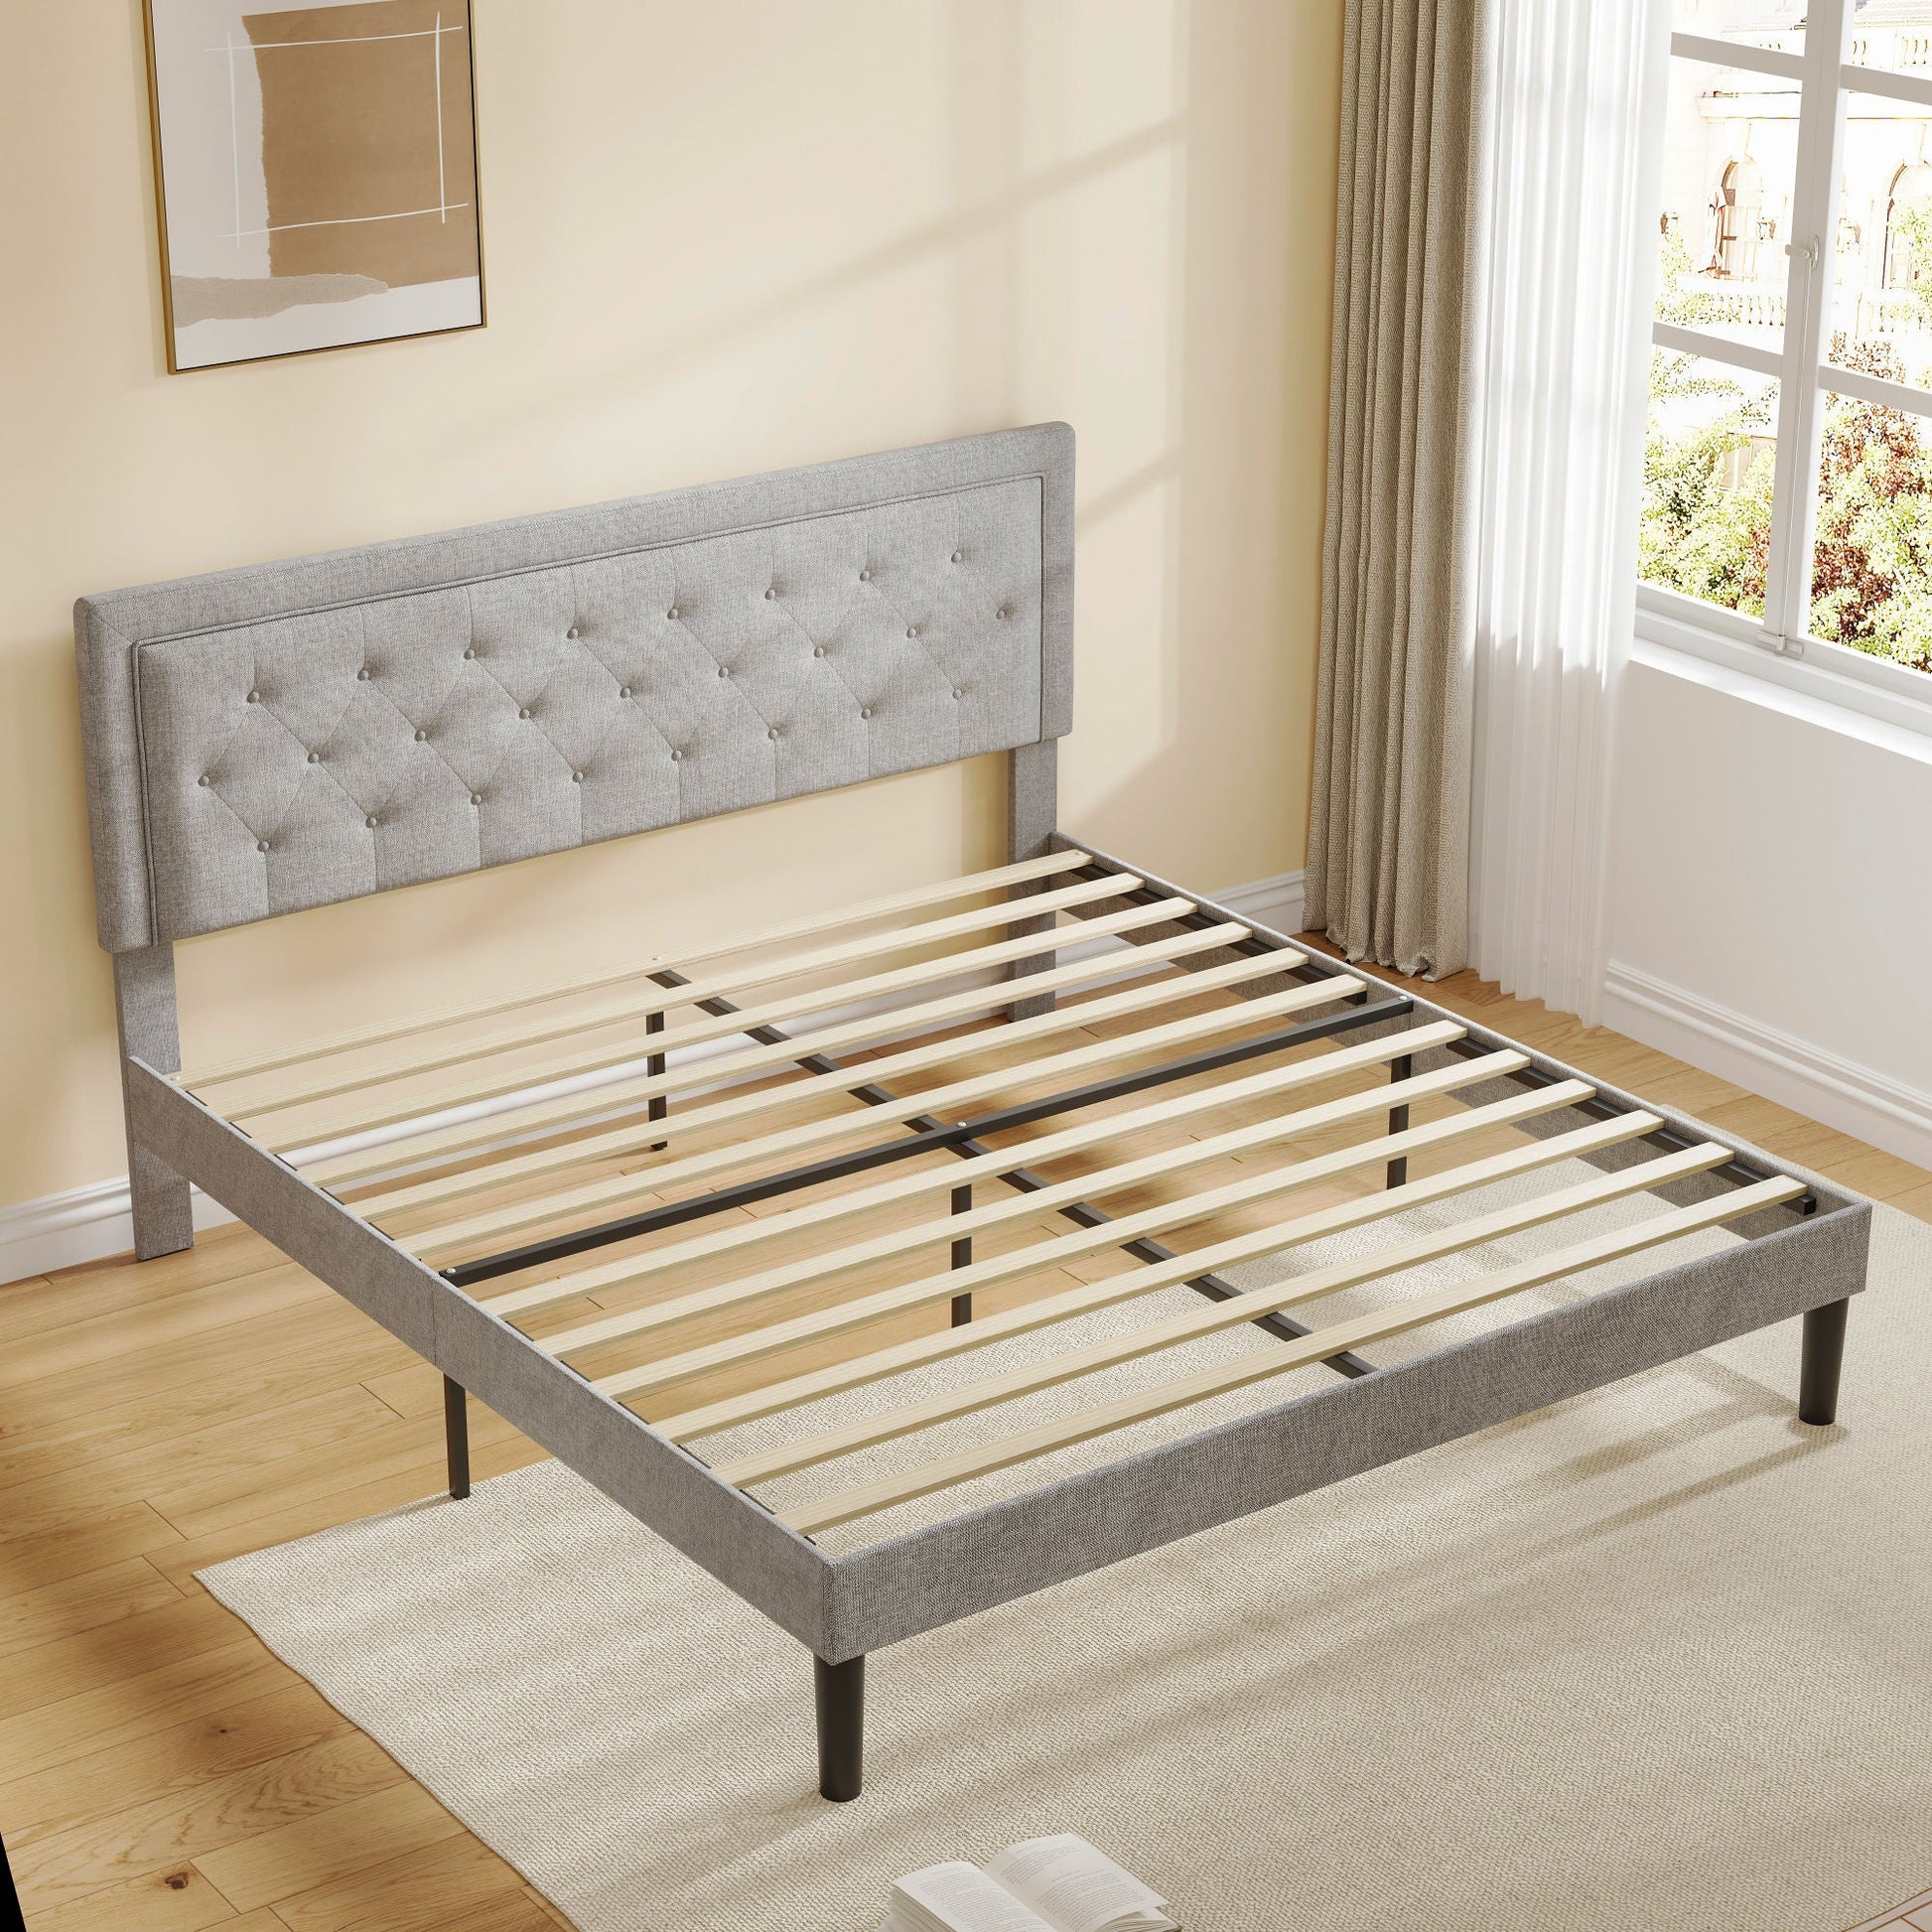 Light Grey Bed Frame with Adjustable Border Headboard Queen Size Home Decor by Design